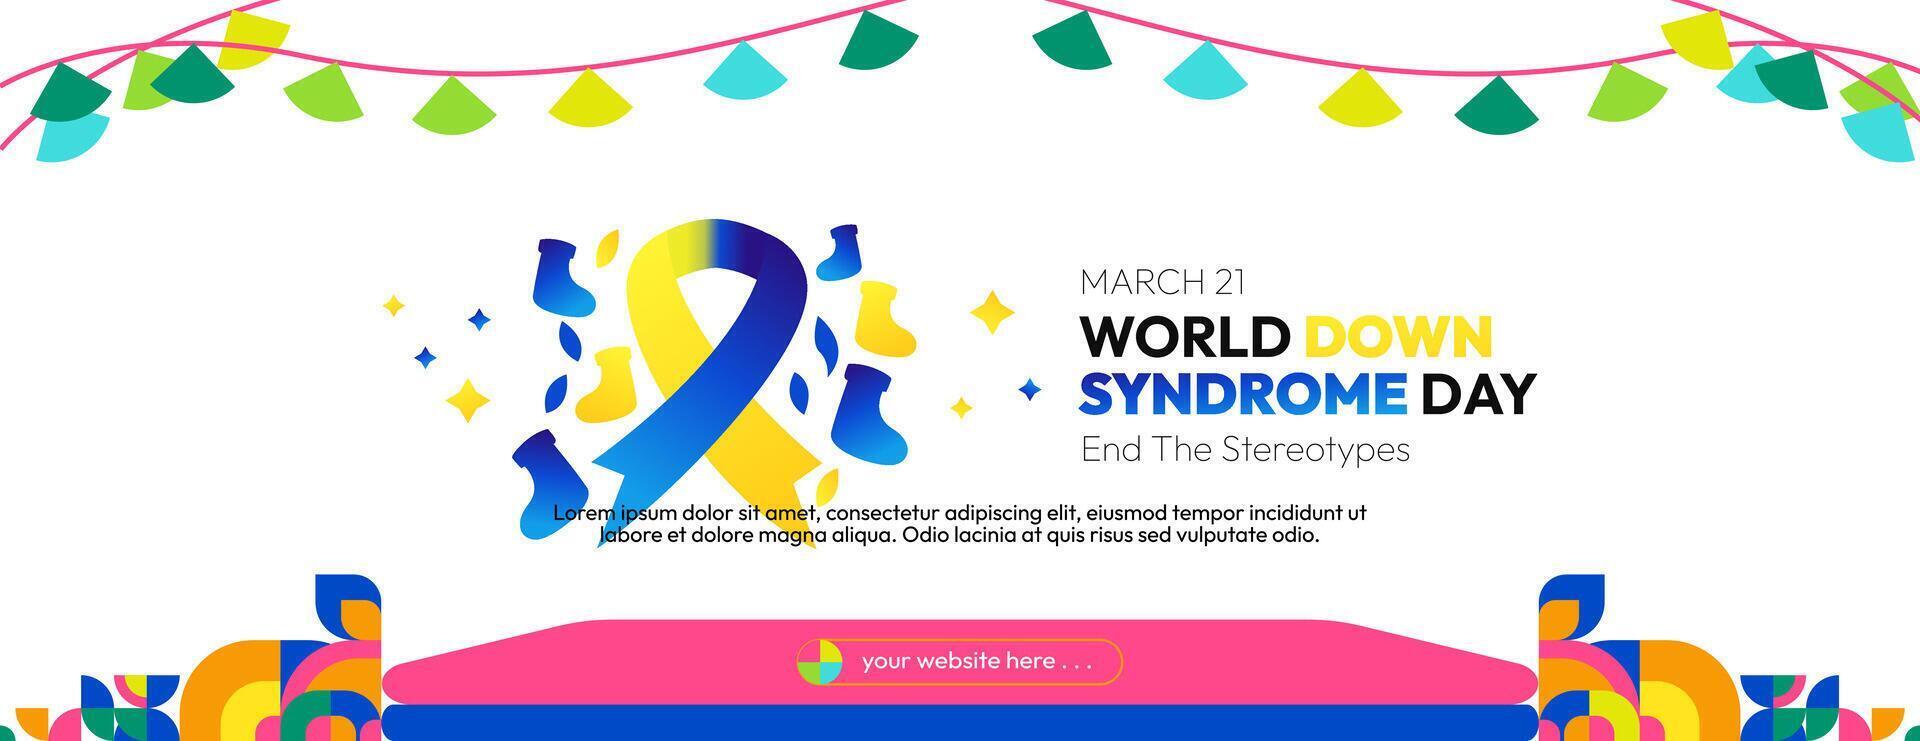 World Down Syndrome Day banner in colorful modern geometric style. Happy Down Syndrome Day wide banner for social media, posters, invitations, greetings and more vector